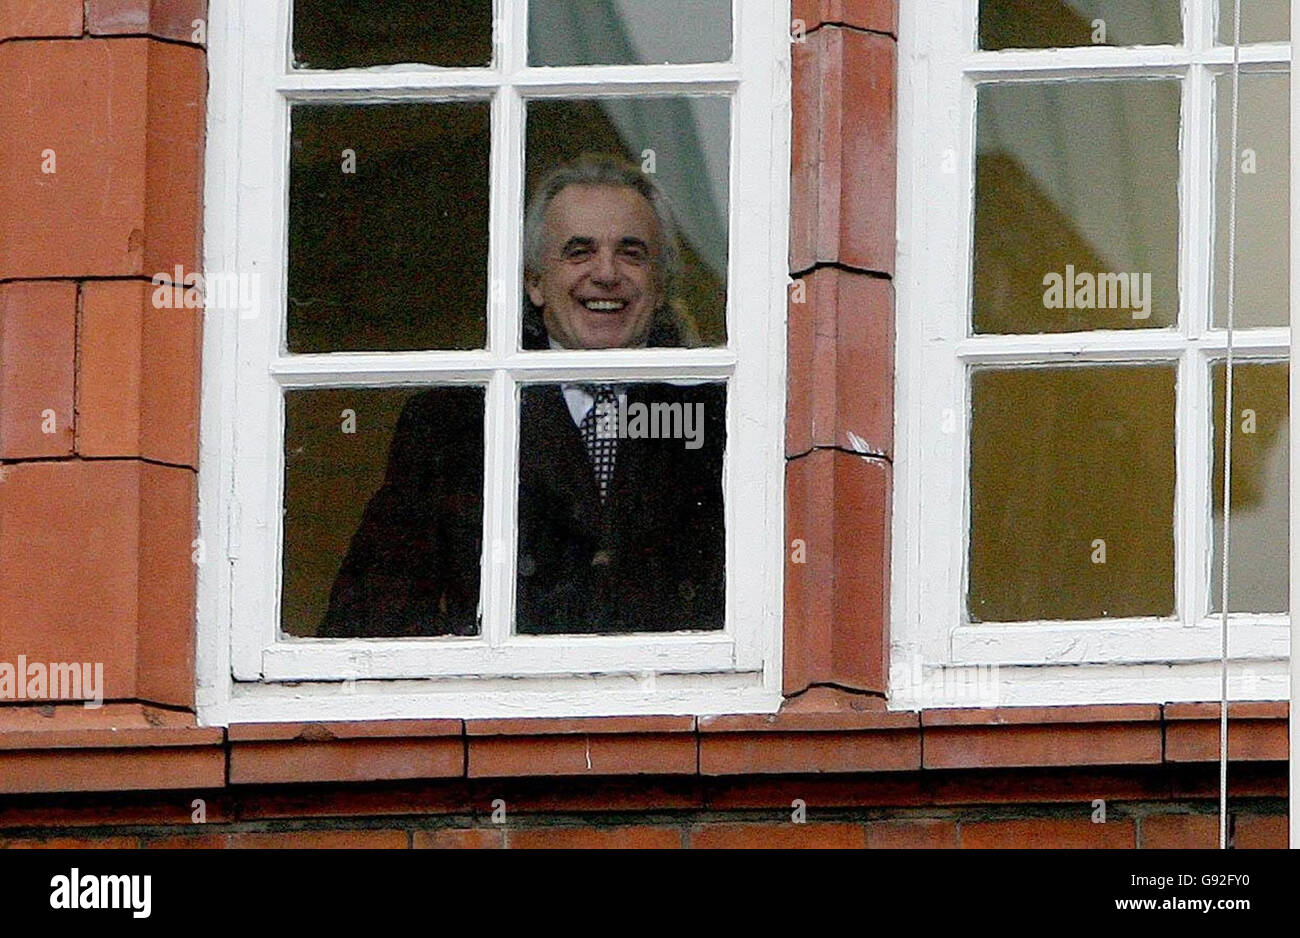 Businessman Peter Stringfellow smiles through a window in Richmond District Court as he awaits the decision on his application to secure a licence for a new lap dancing club in central Dublin, Monday January 9, 2006. The British night club owner is planning to open the club in Parnell Street but he has encountered major opposition from locals who believed it will lower the image and safety of the area. See PA story COURTS Stringfellow. PRESS ASSOCIATION Photo. Photo credit should read: Niall Carson/PA. Stock Photo